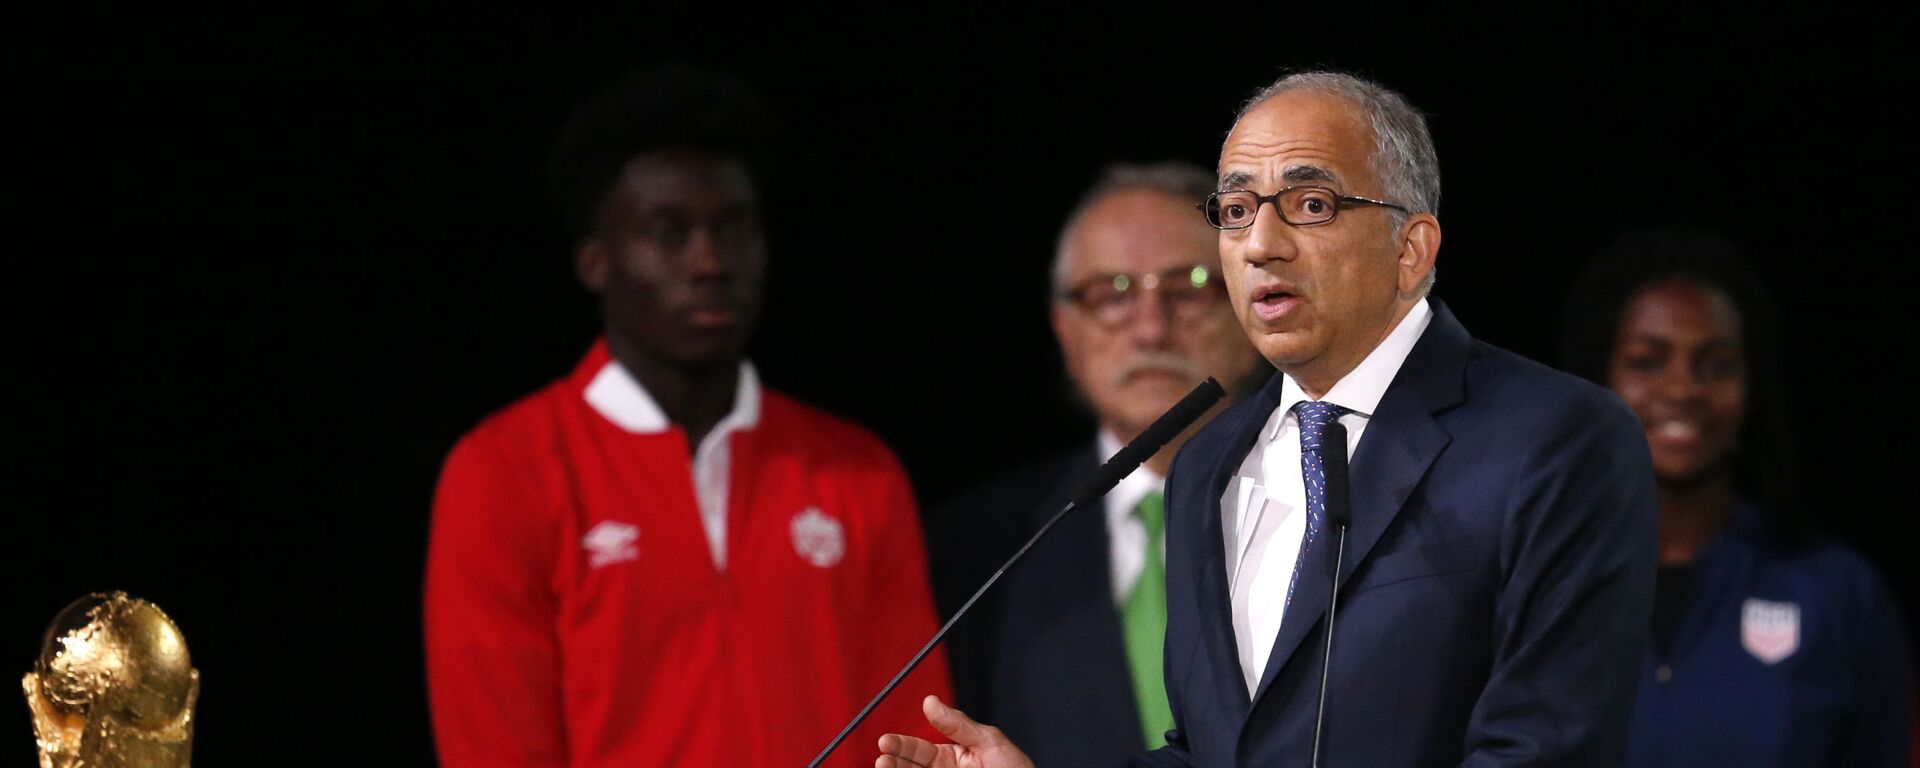 Carlos Cordeiro, the president of the United States Soccer Federation speaks at the FIFA congress on the eve of the opener of the 2018 soccer World Cup in Moscow - اسپوتنیک افغانستان  , 1920, 30.09.2021